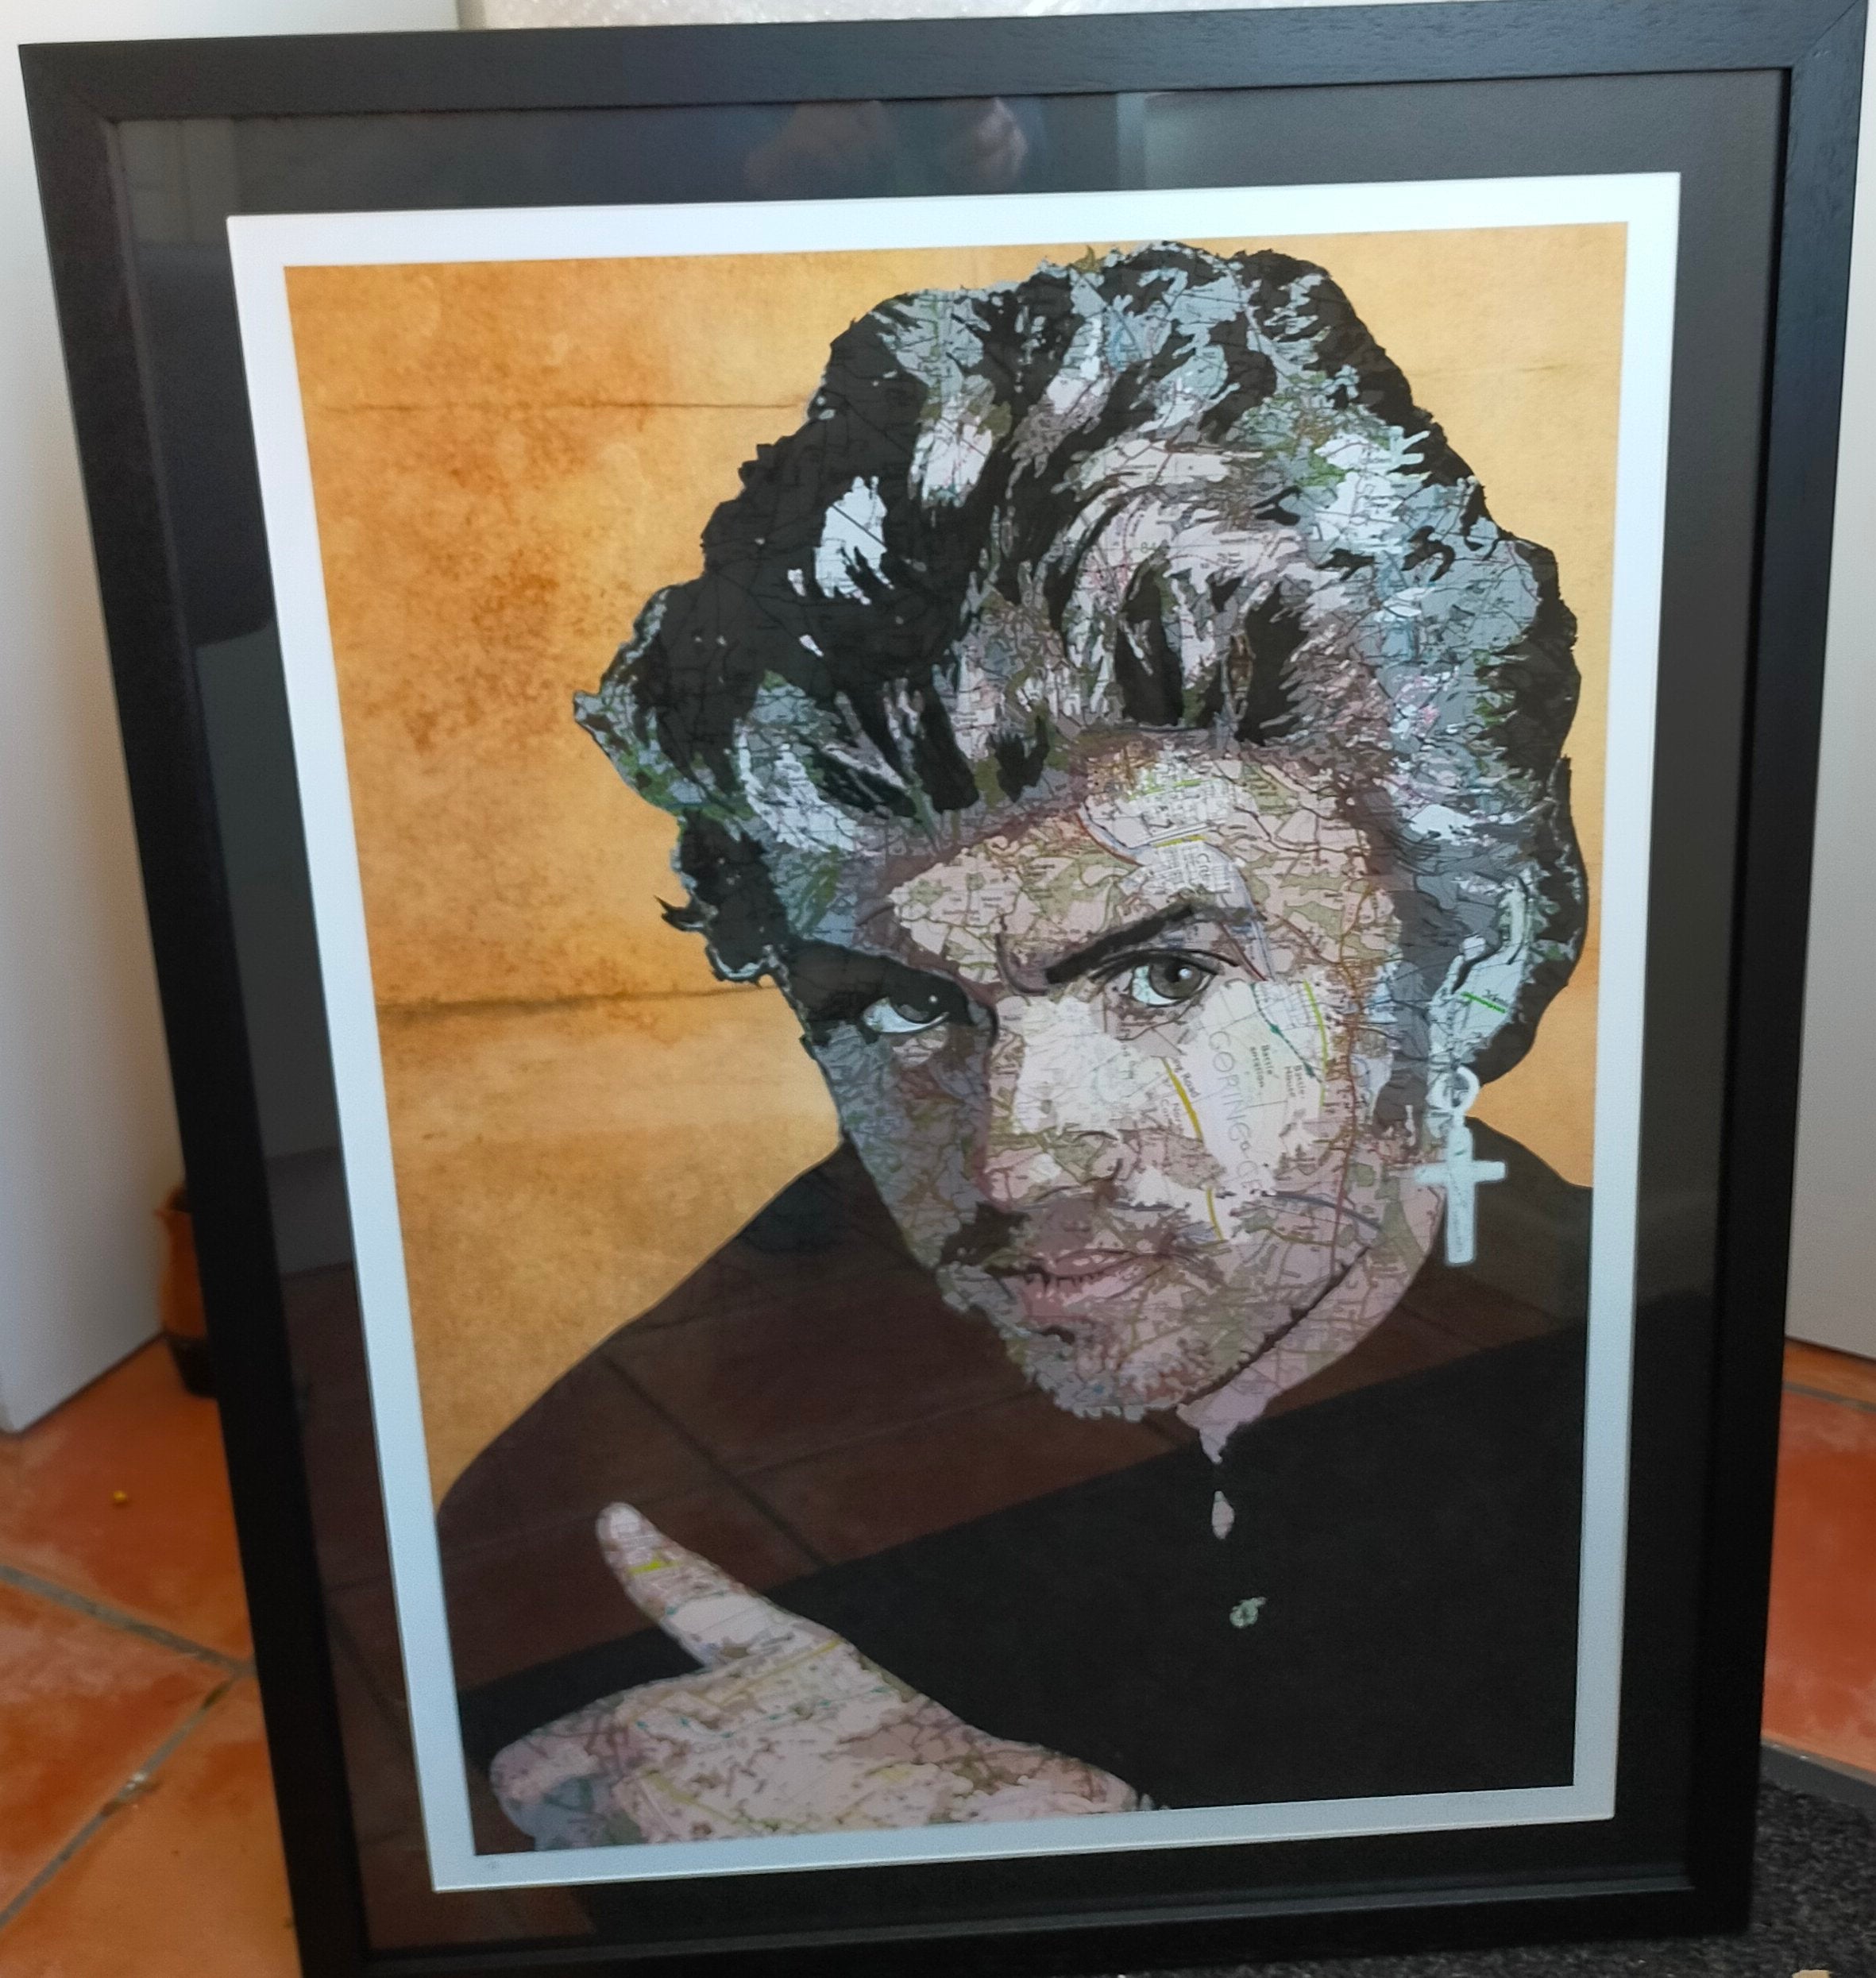 "George Michael in Goring" by Amelia Archer